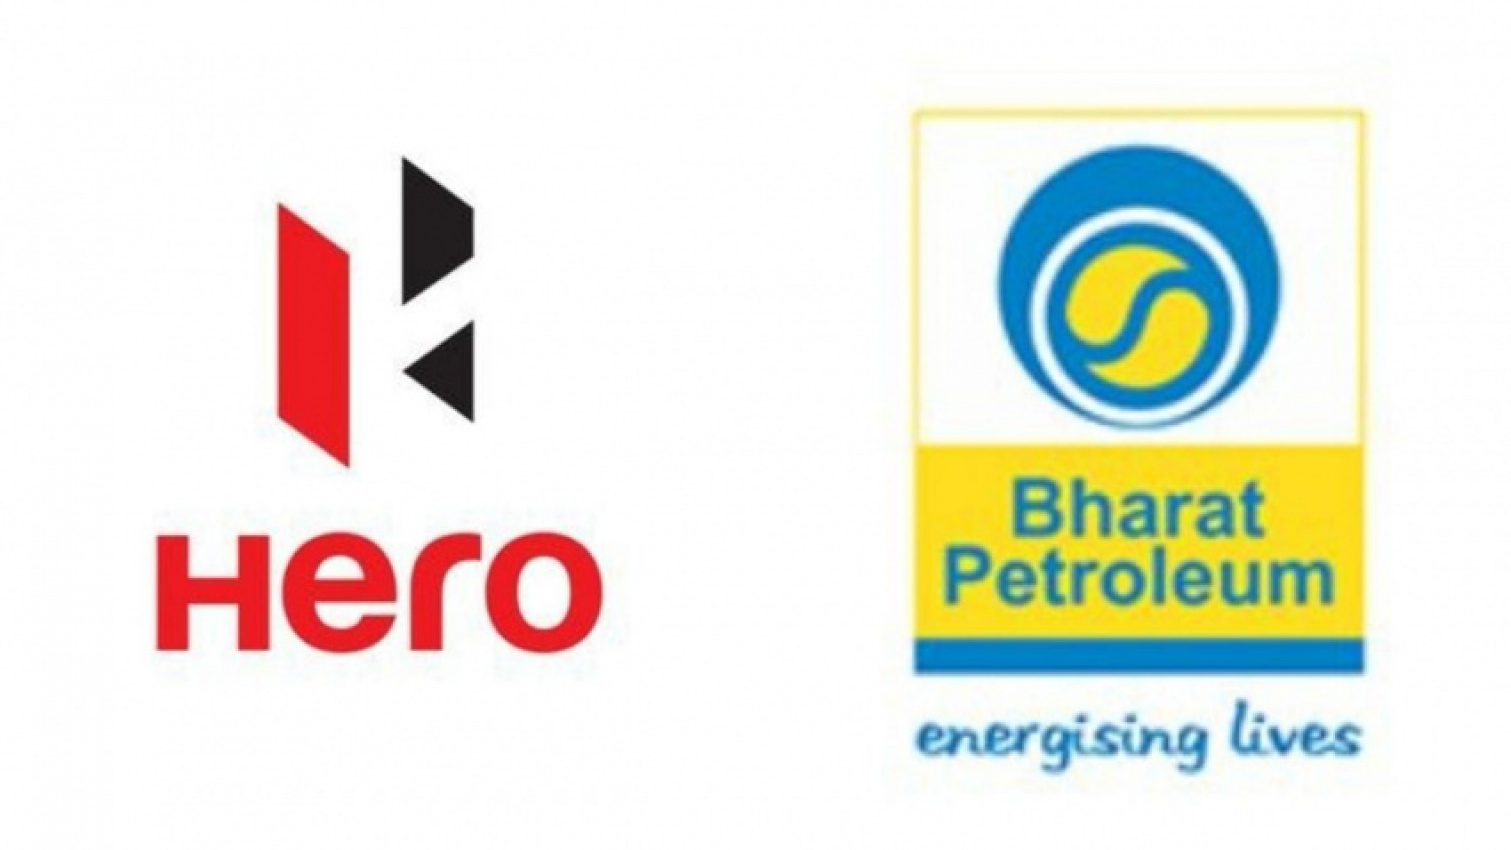 autos, cars, auto news, bpcl, bpcl charging infrastructure, carandbike, charging infrastructure, electric two-wheelers, hero electric two-wheelers, hero moto corp, hero motocorp, hero motocorp and bpcl, hero motocorp charging infrastructure, hero motocorp ev charging stations, news, hero motocorp and bpcl partner to set up charging infrastructure for electric two-wheelers